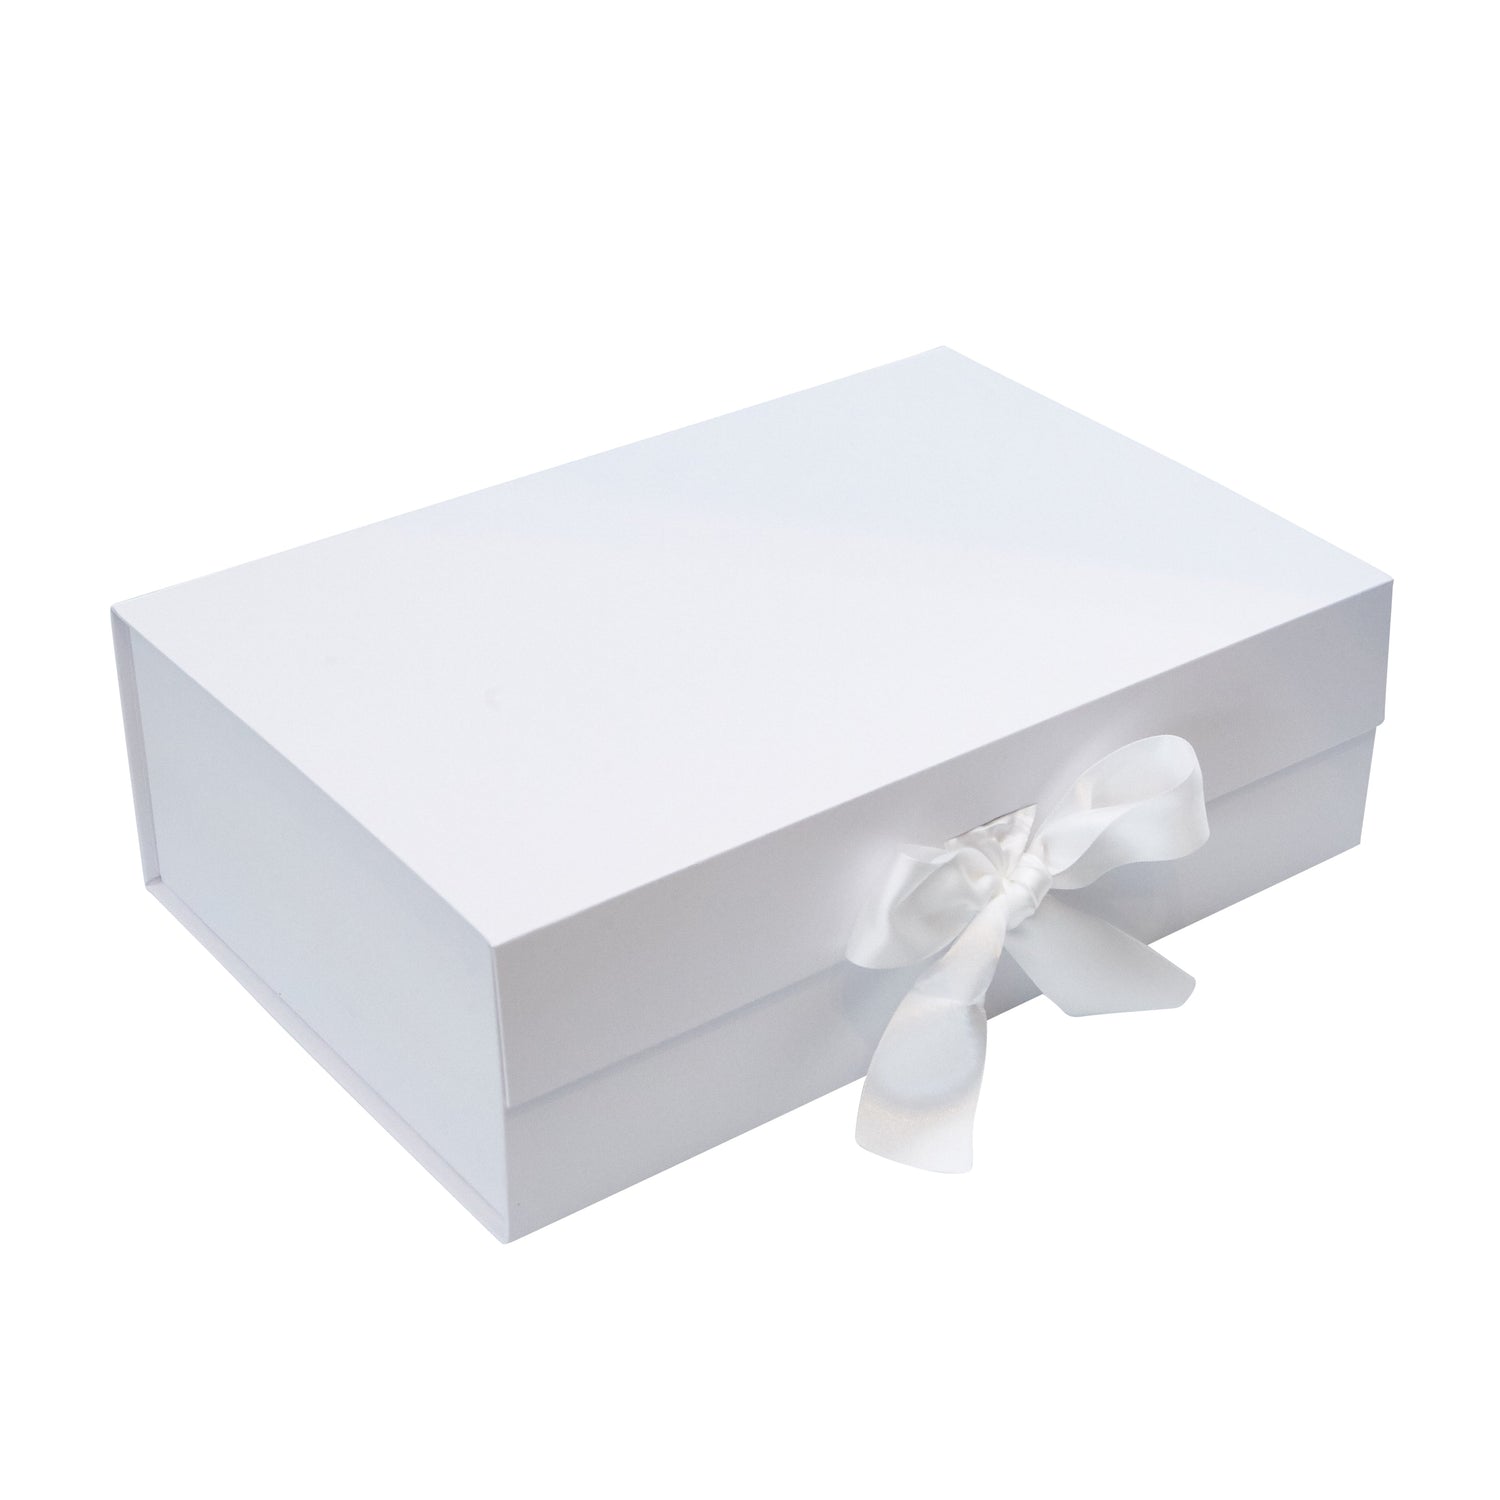 https://www.bubblybox.com.au/collections/wedding-gift-boxes